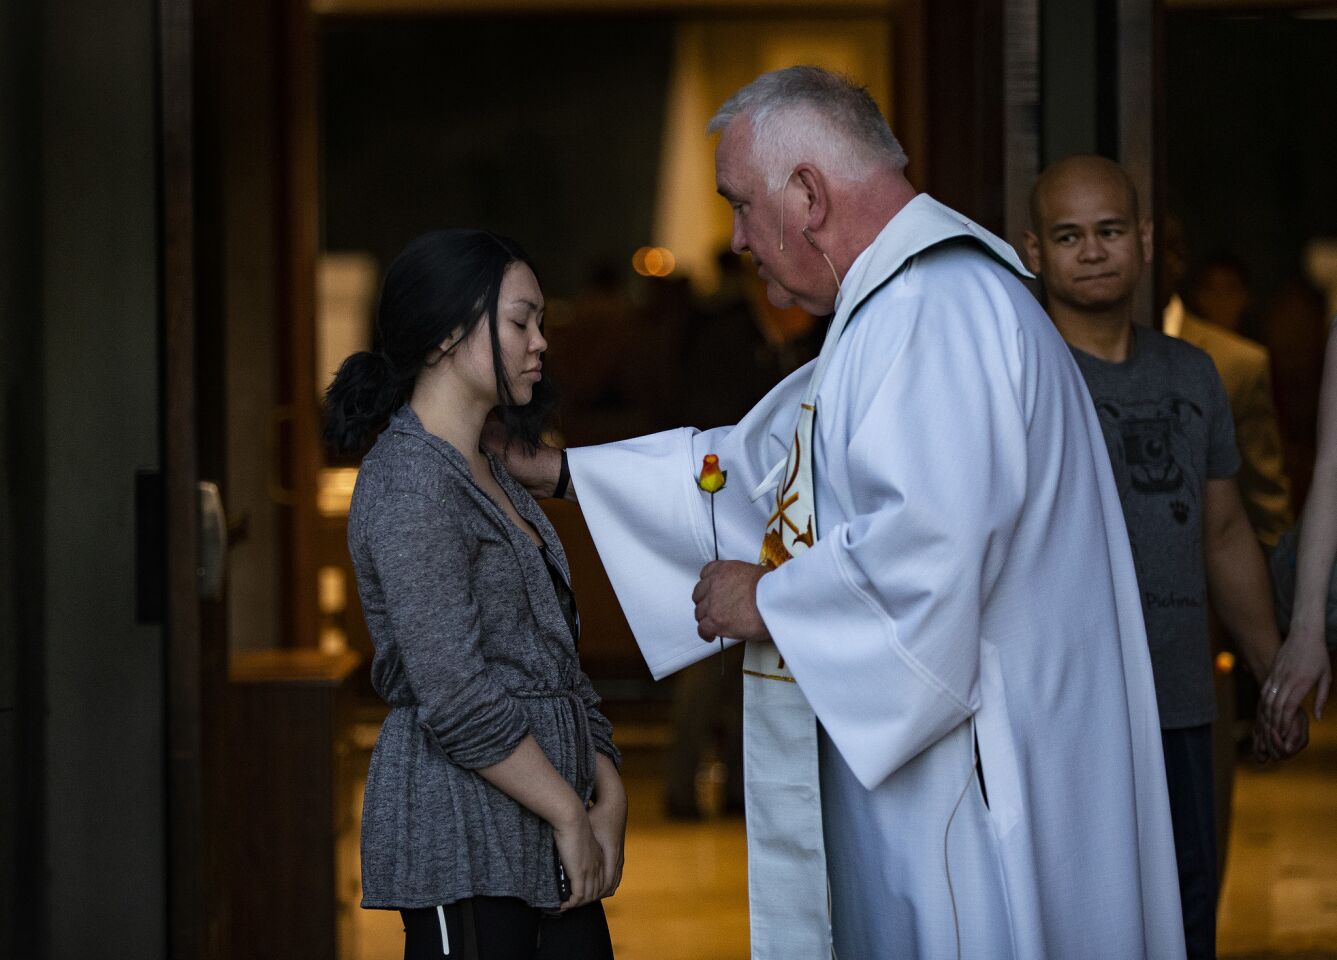 Father Bob Stoeckig prays with a resident after an interfaith event at Guardian Angel Cathedral to mark the first anniversary of the Las Vegas mass shooting.